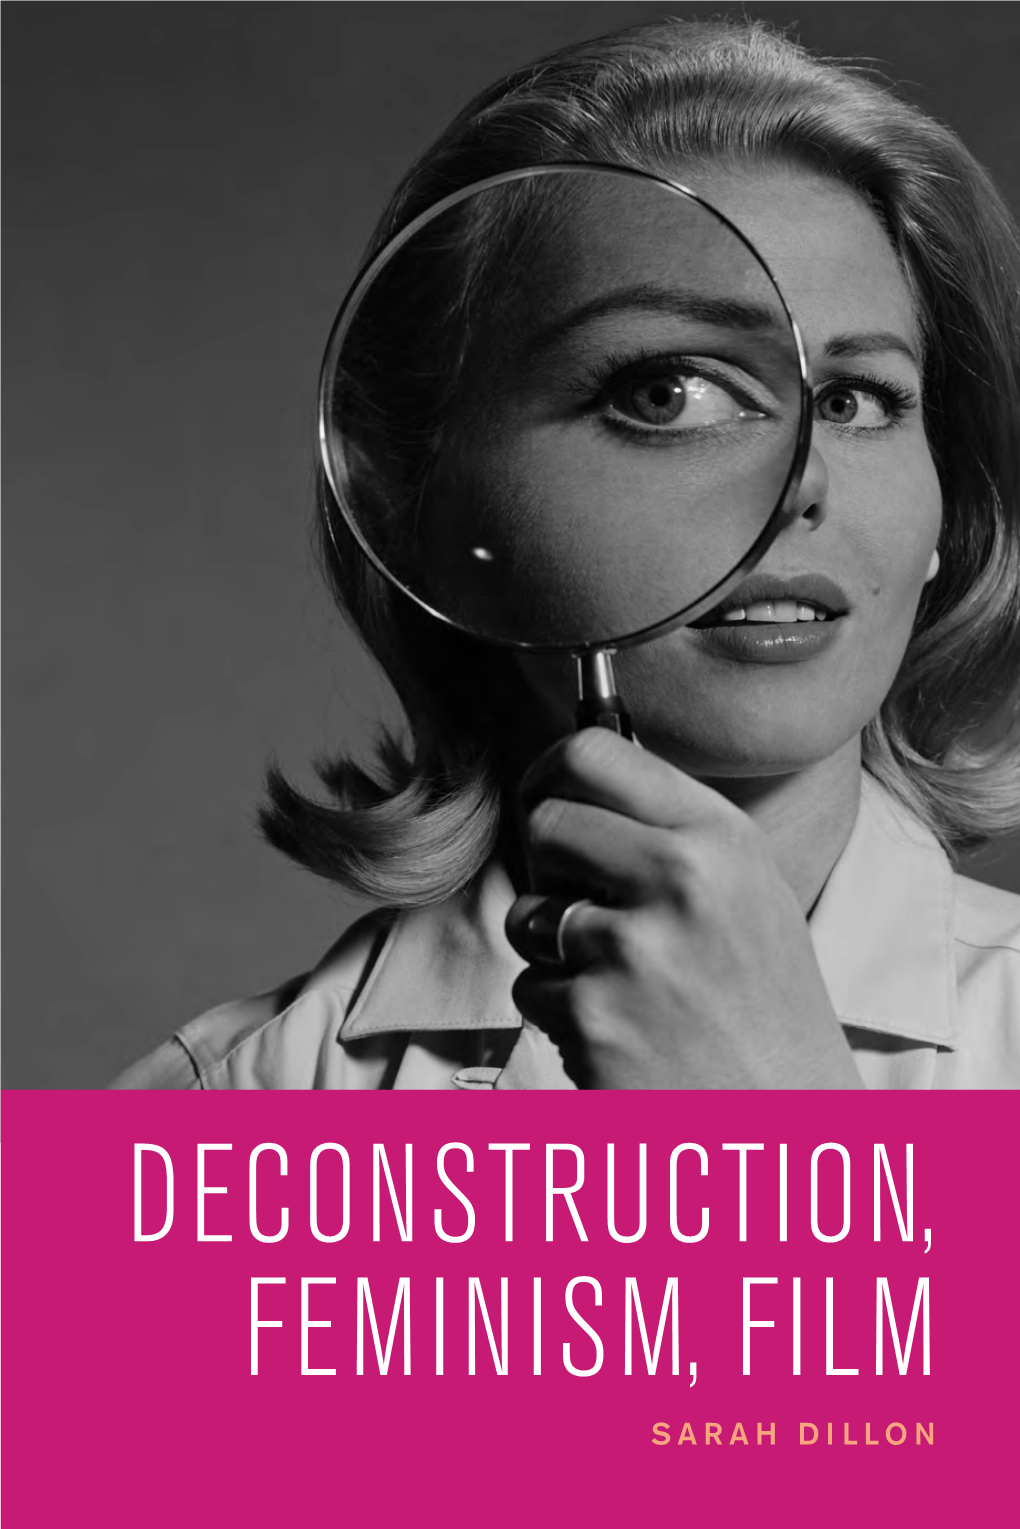 DECONSTRUCTION, FEMINISM, FILM SARAH DILLON Deconstruction, Feminism, Film Douglas Sirk, Aesthetic Modernism and the Culture of Modernity